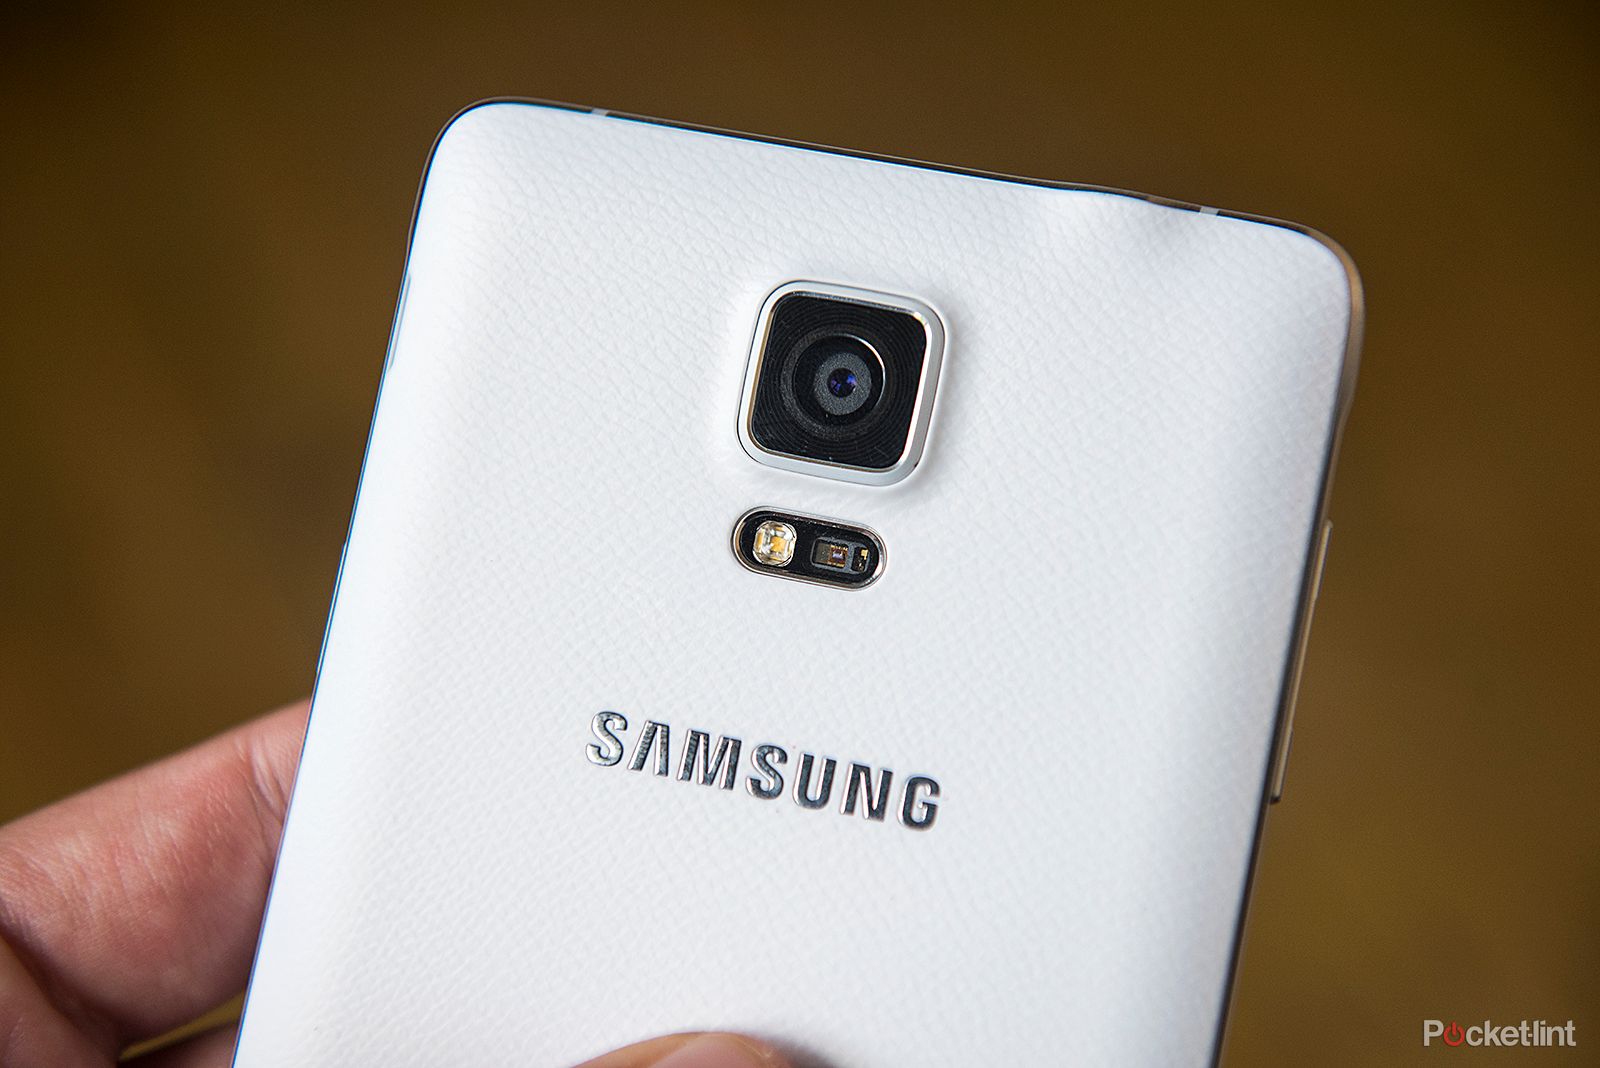 samsung galaxy note 5 to be announced on 12 august s6 edge plus too  image 1